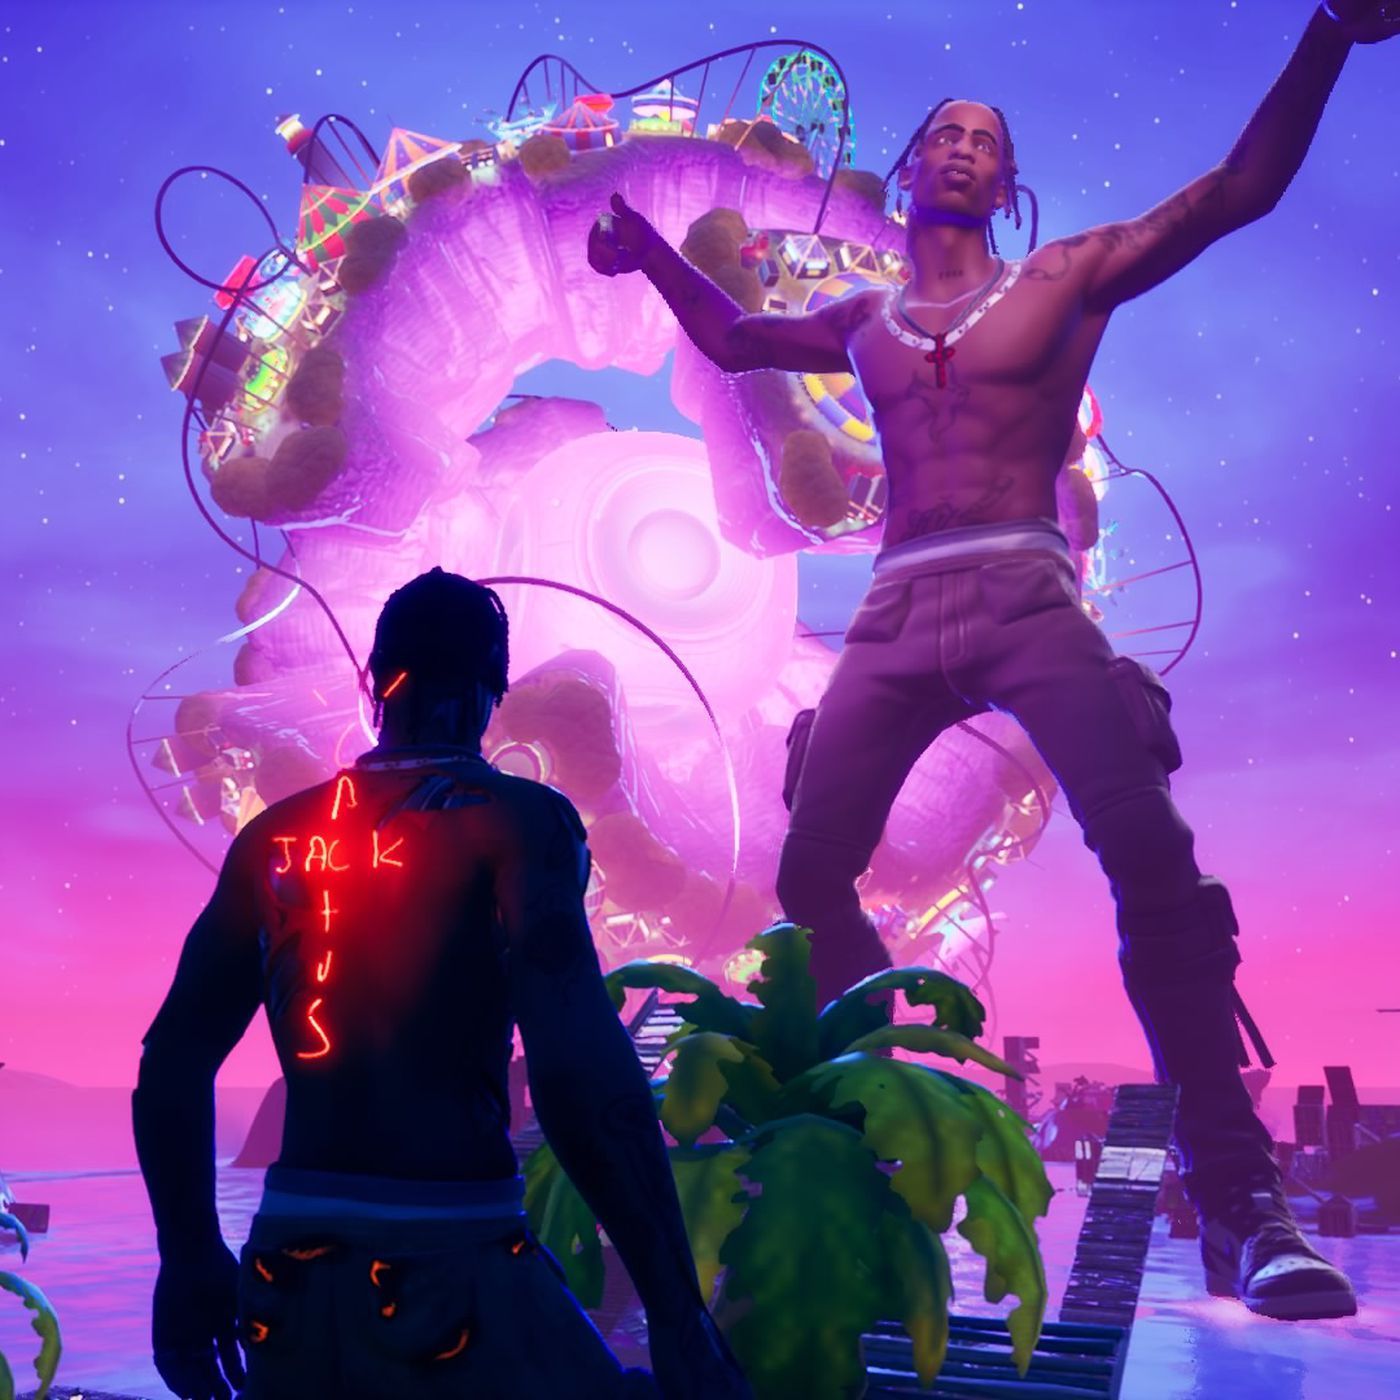 Travis Scott's first Fortnite concert was surreal and spectacular